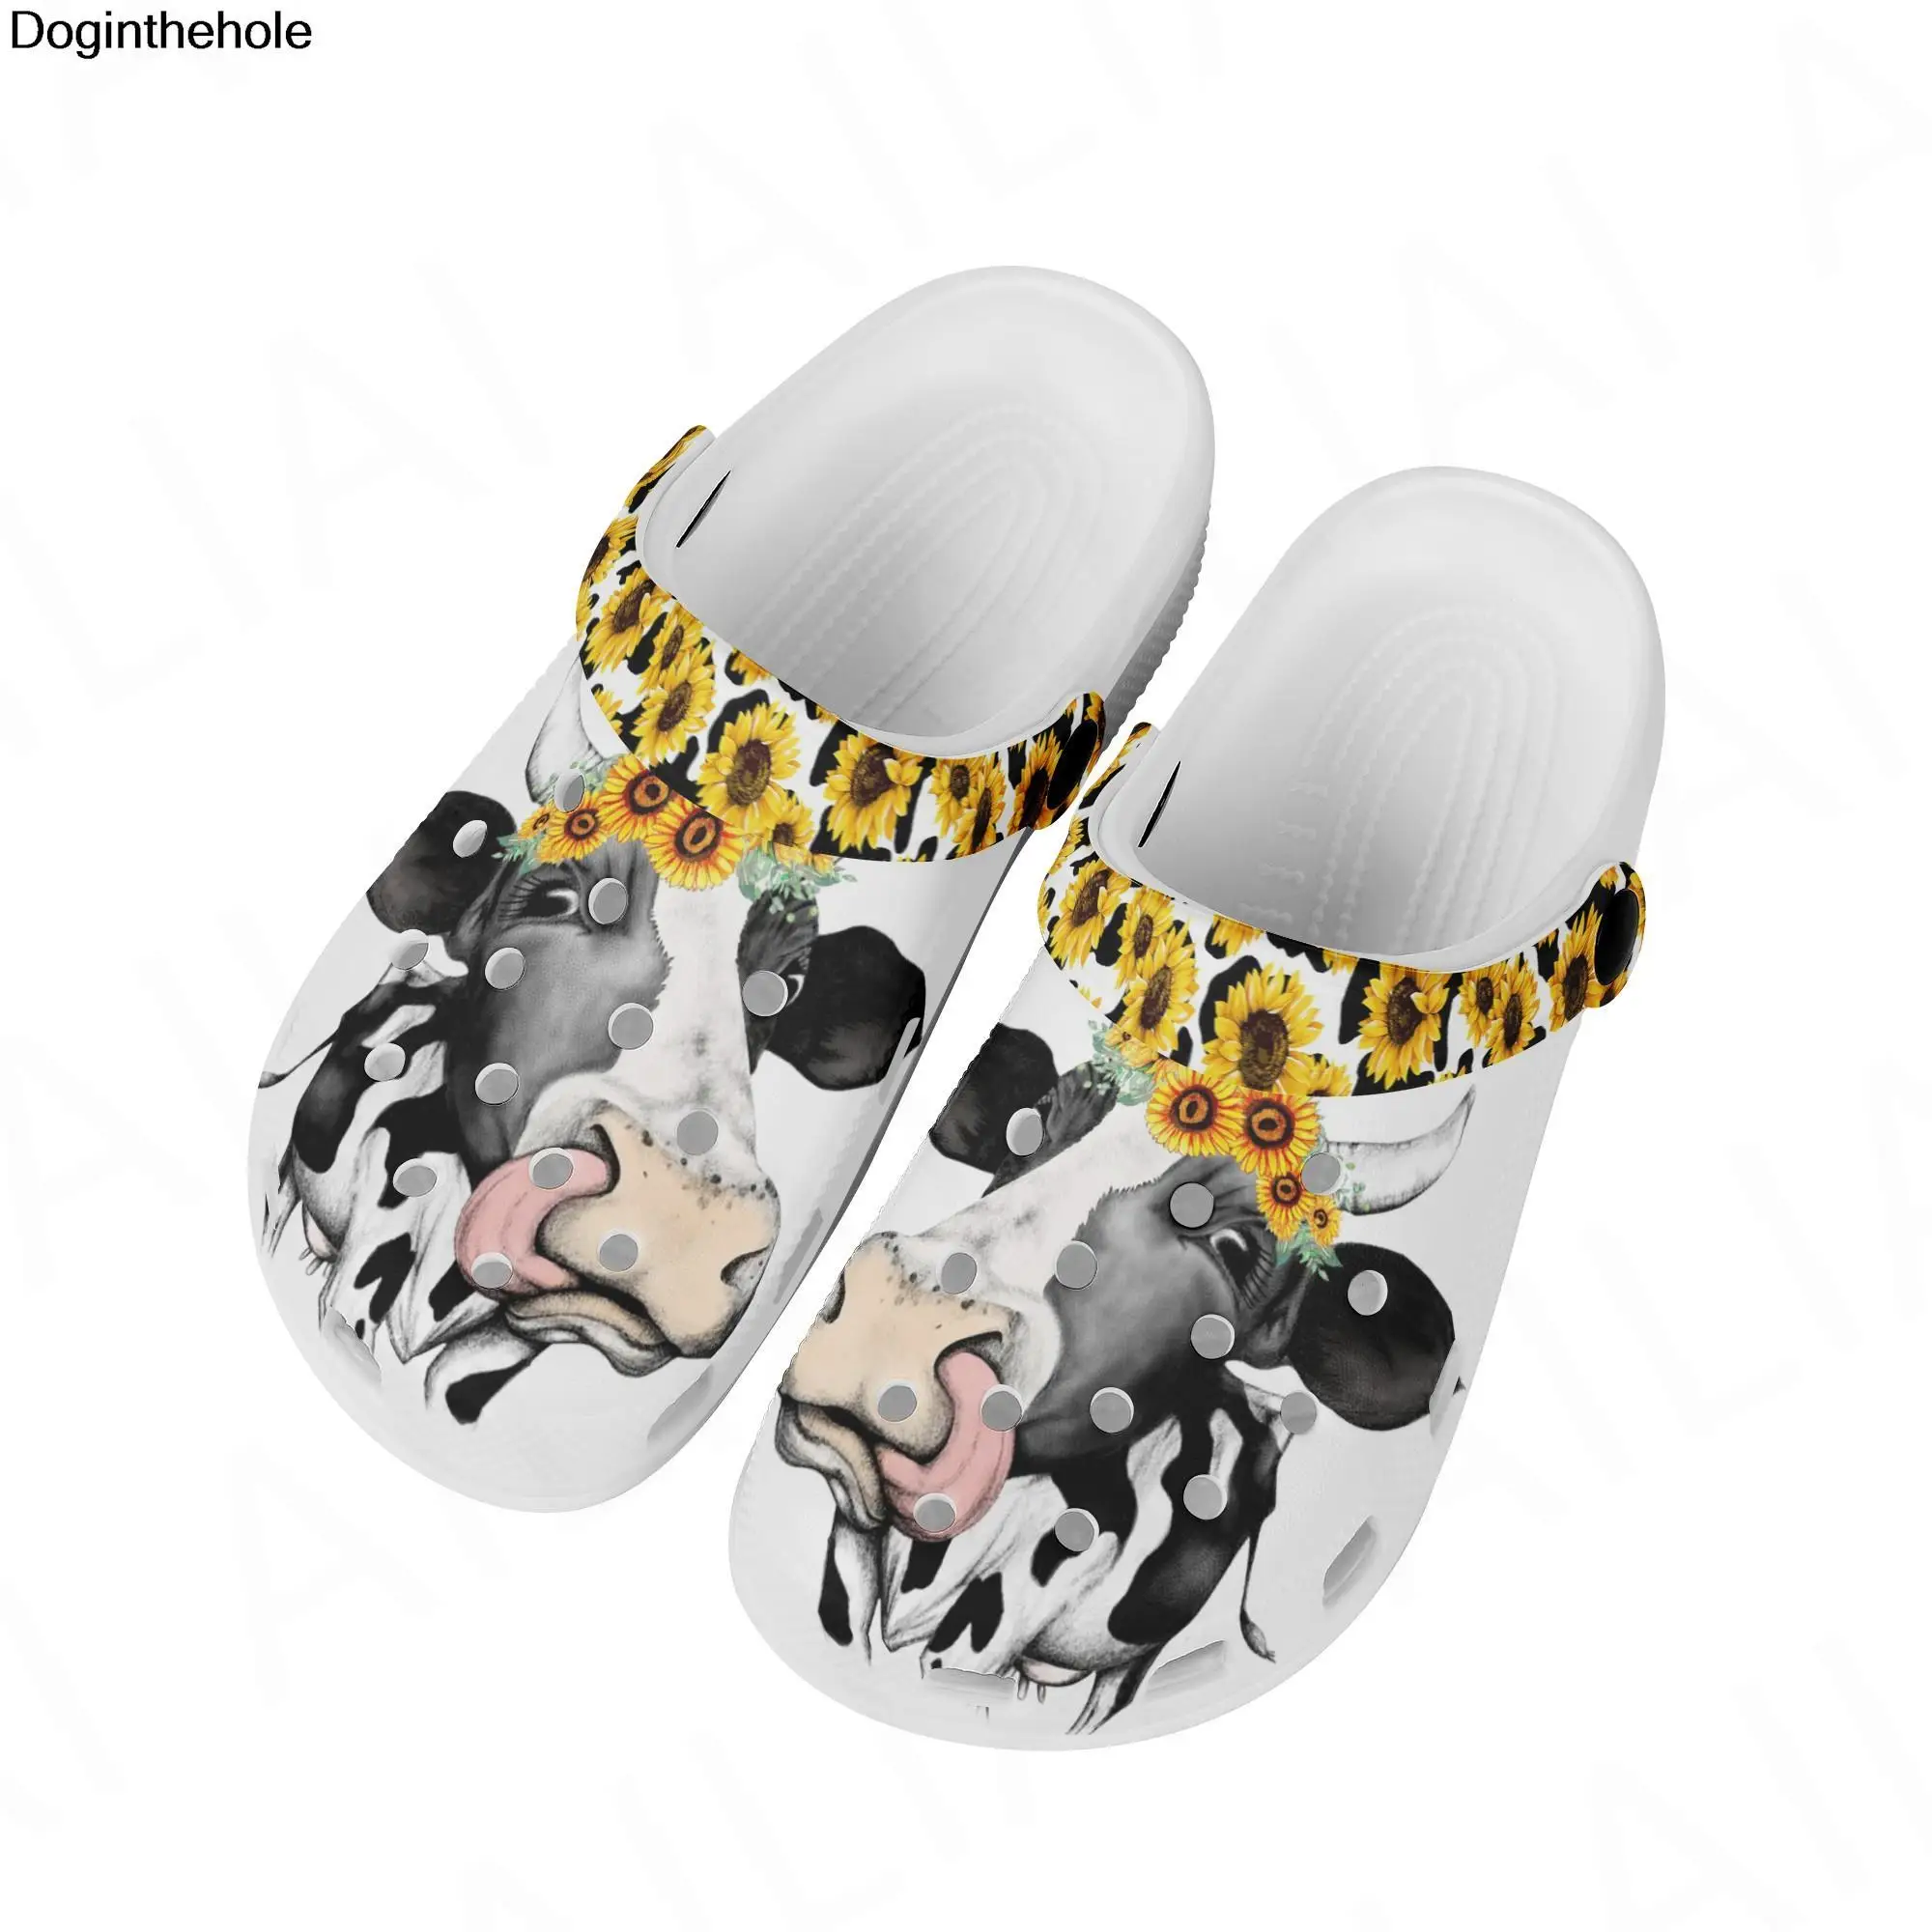 Casual Hole Sandals Sunflower Cow Print Beach Walking Sneaker Shoes Light Weight Living Room Anti Slip Slipper Personalization